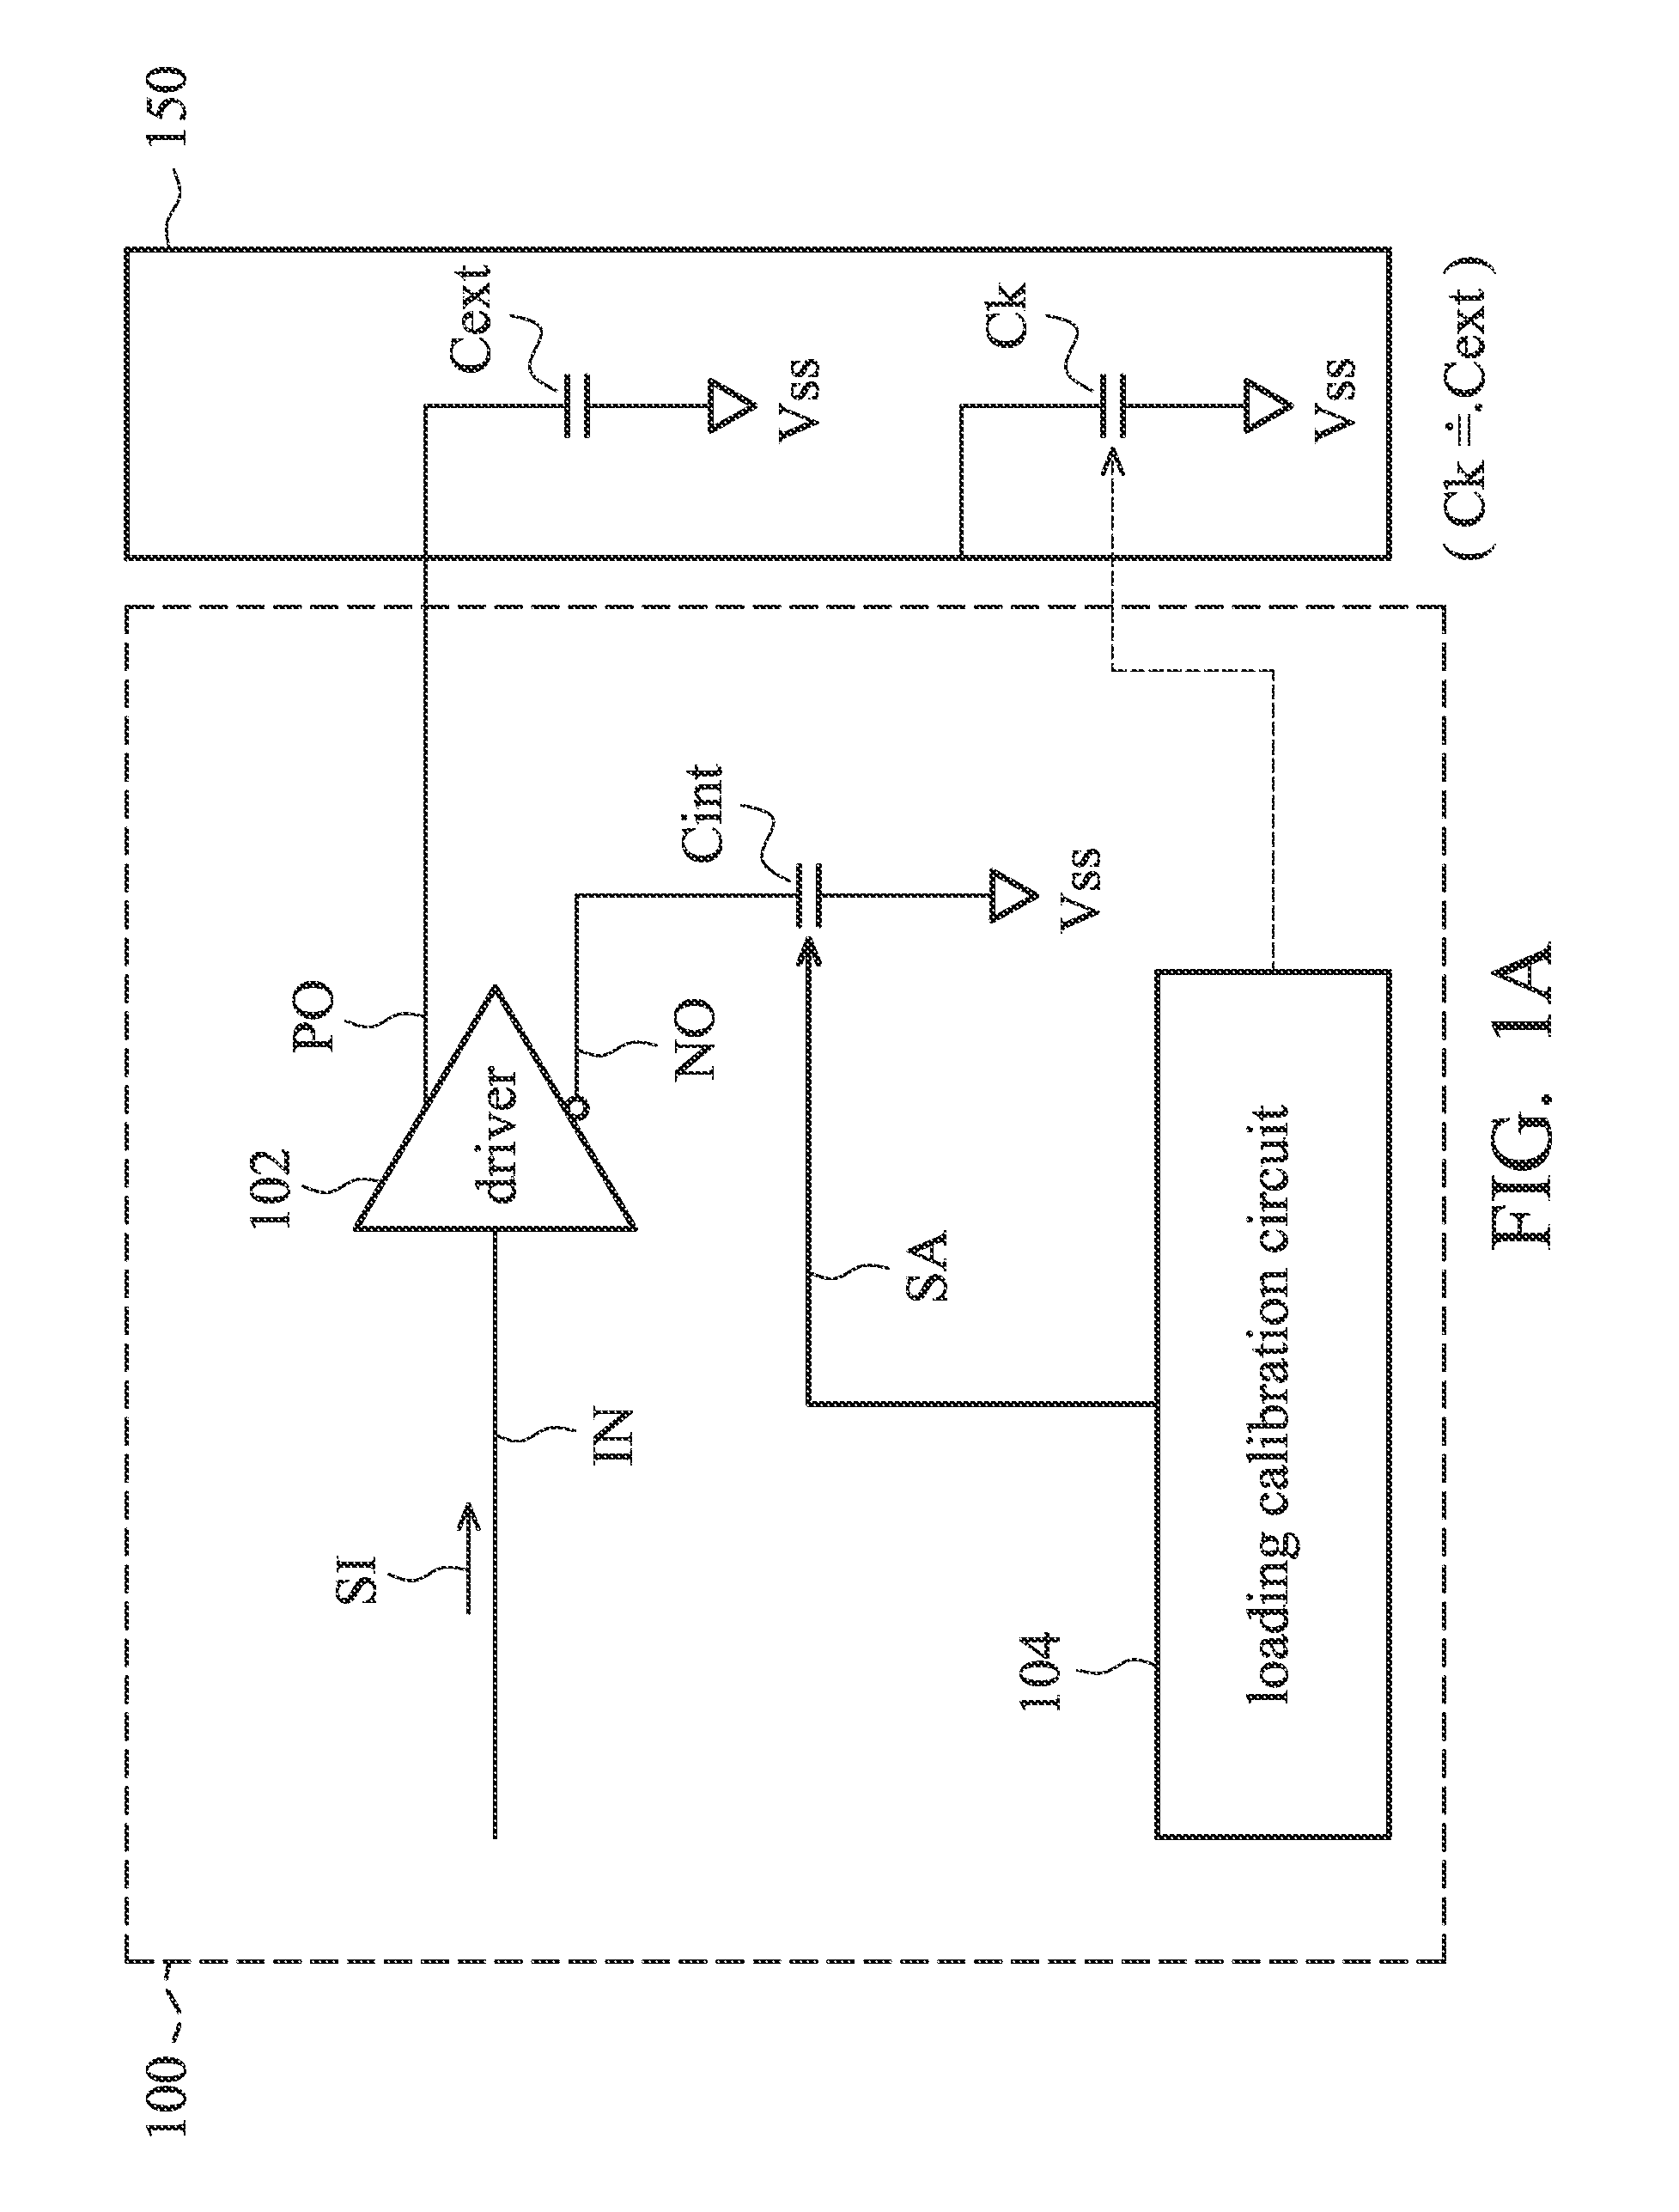 Apparatus for reducing simultaneous switching noise